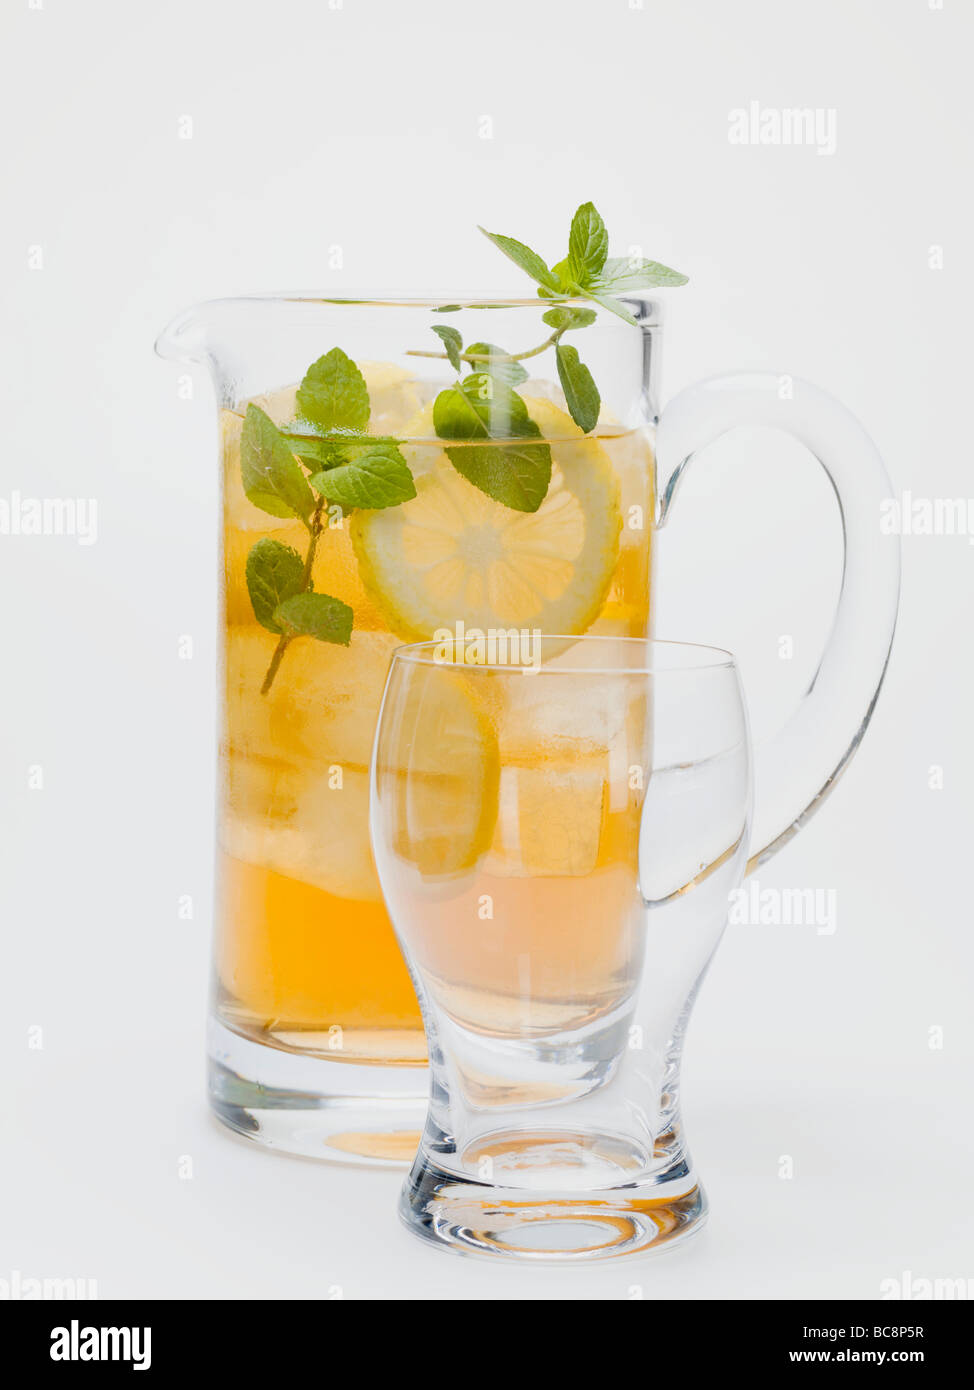 https://c8.alamy.com/comp/BC8P5R/iced-tea-with-lemon-slices-and-fresh-mint-in-glass-jug-BC8P5R.jpg